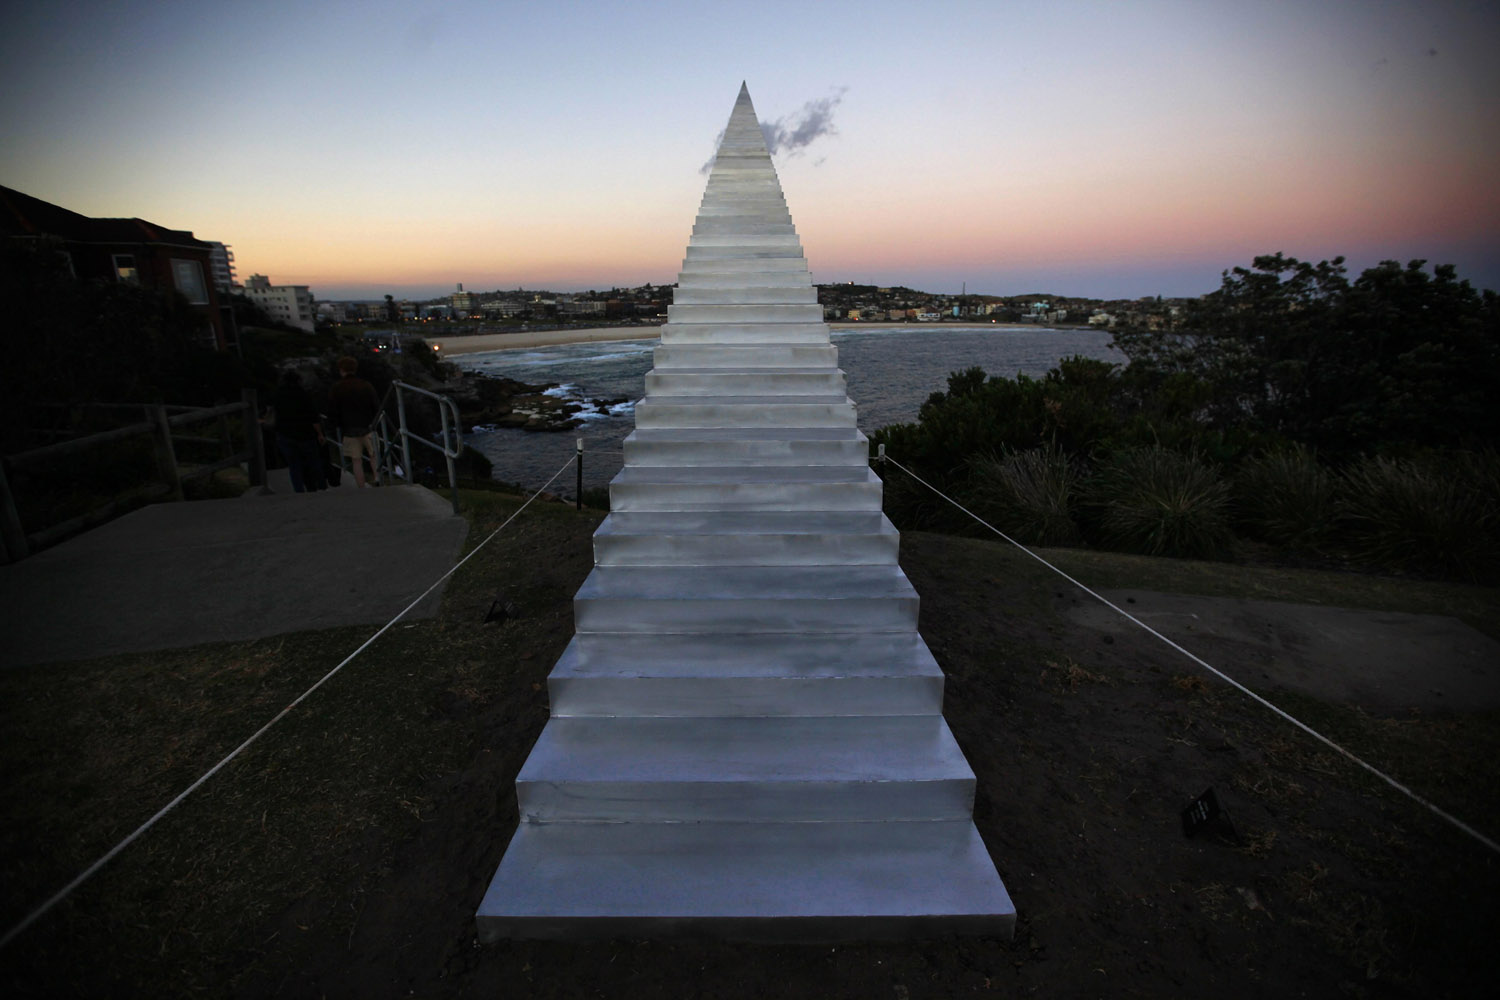 Oct. 24, 2013. A sculpture by artist David McCracken titled  Diminish and Ascend, ' can be seen as part of the  Sculpture by the Sea  exhibition at Sydney's Bondi Beach.